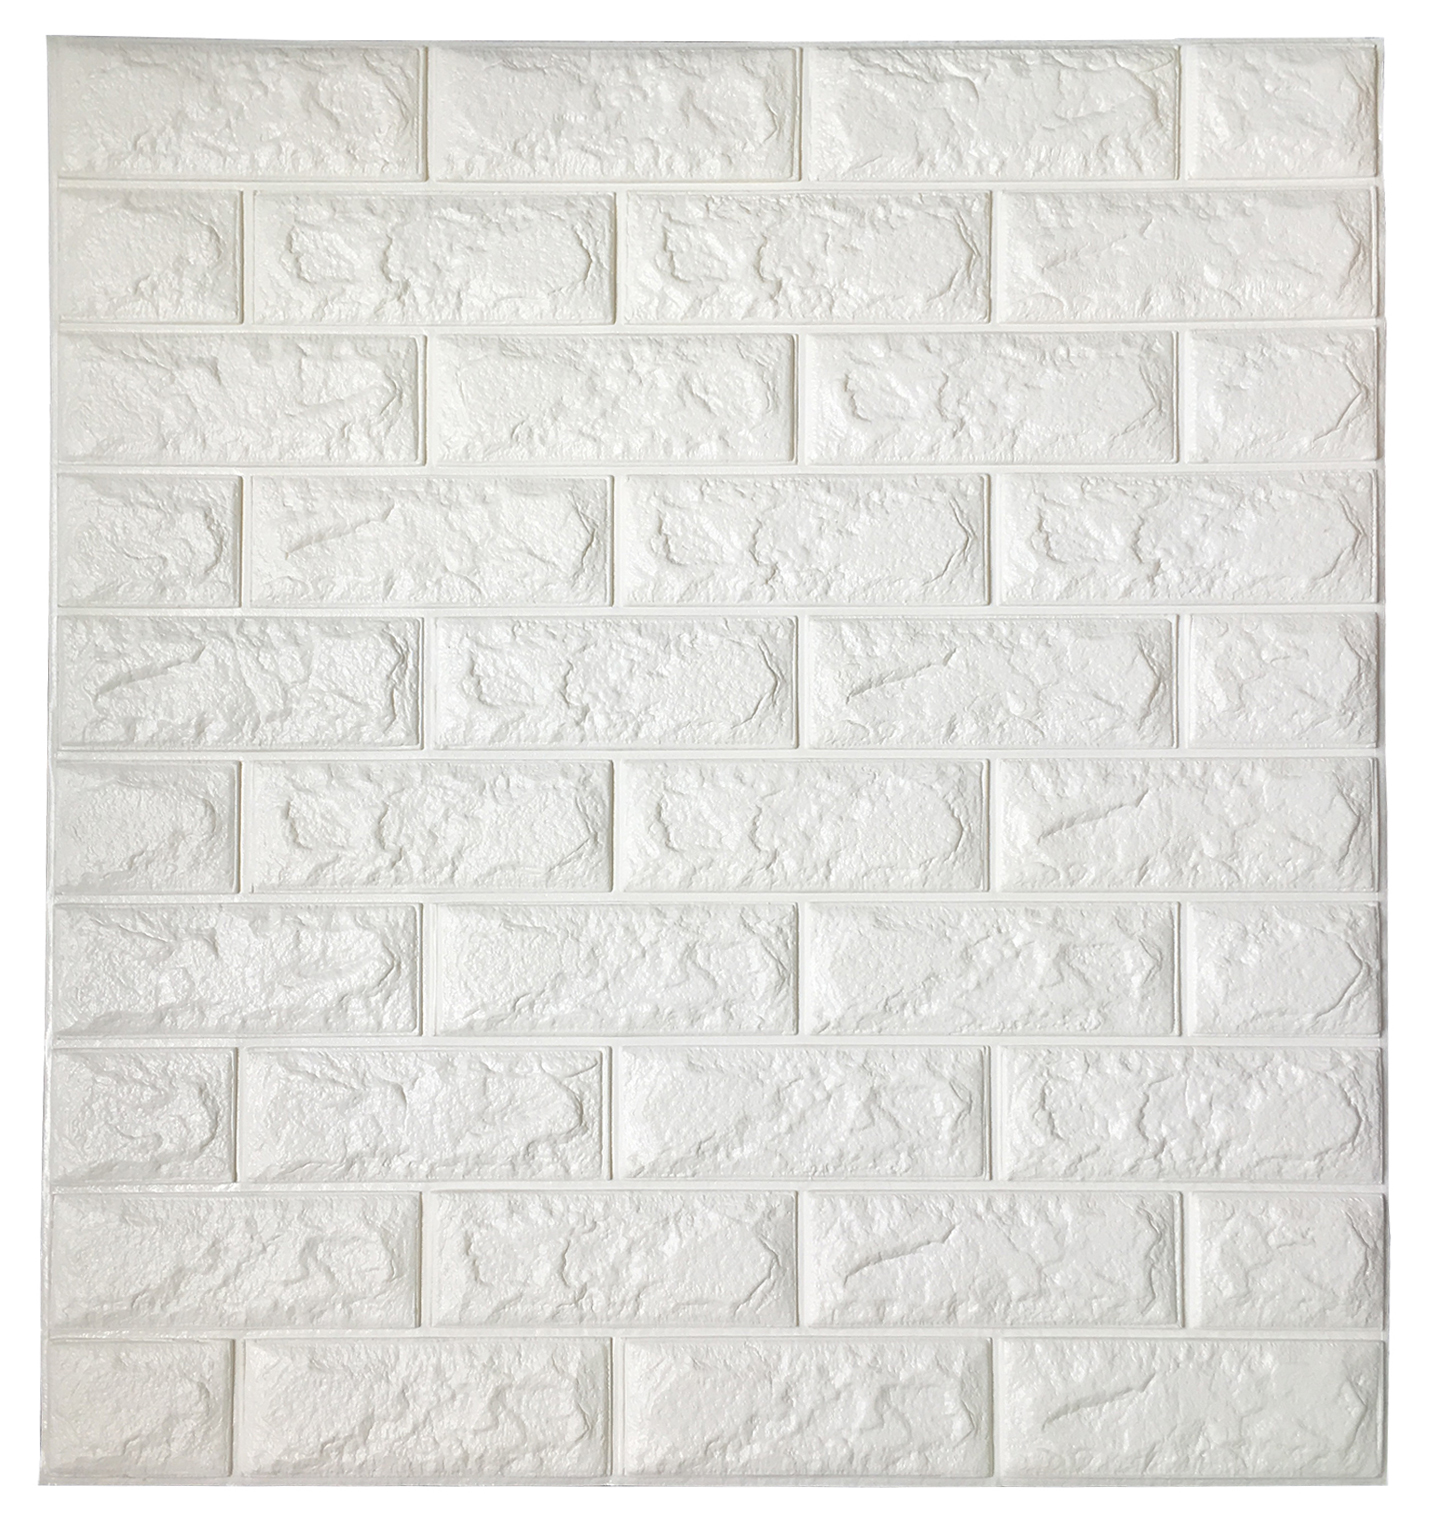 2.6' x 2.3' Peel and Stick 3D Wall Panels White Brick Wallpaper for TV Walls / Sofa Background Wall Decor